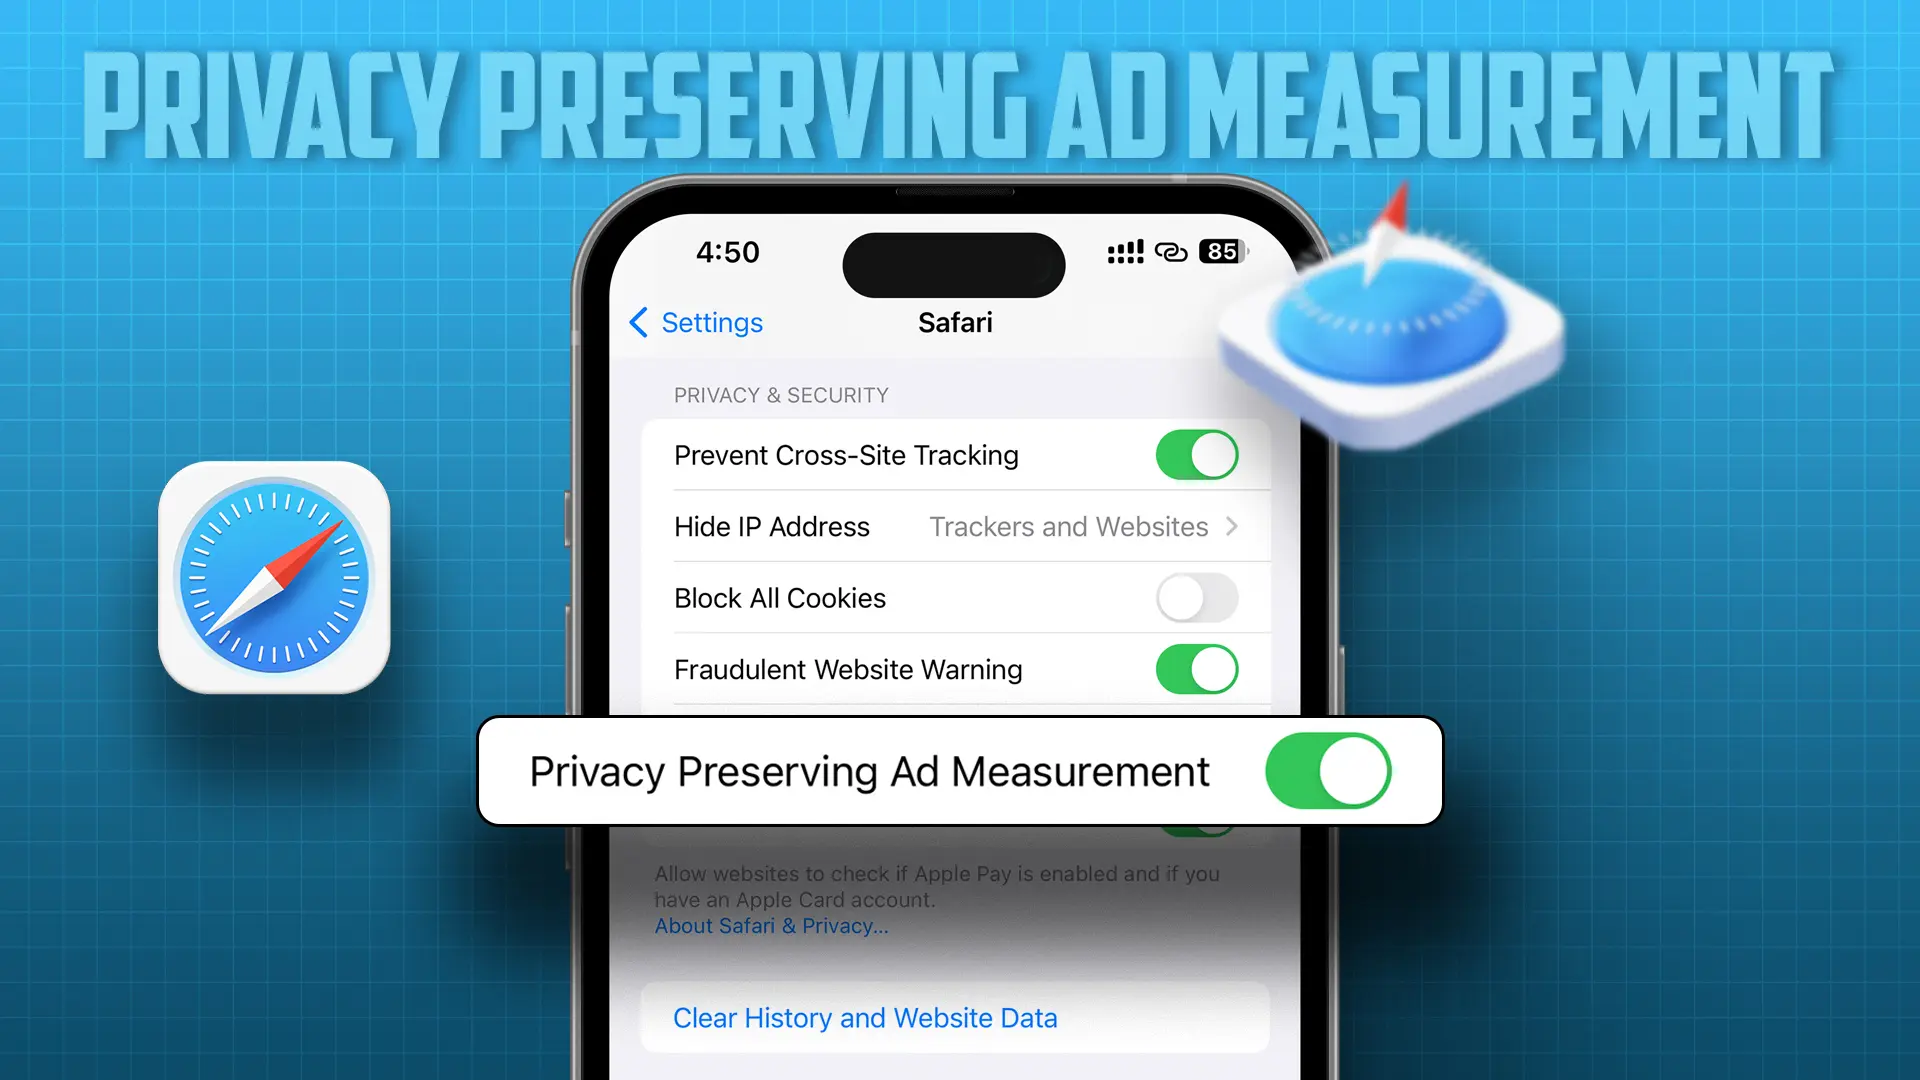 Enable Privacy Preserving Ad Measurement in Safari on iPhone